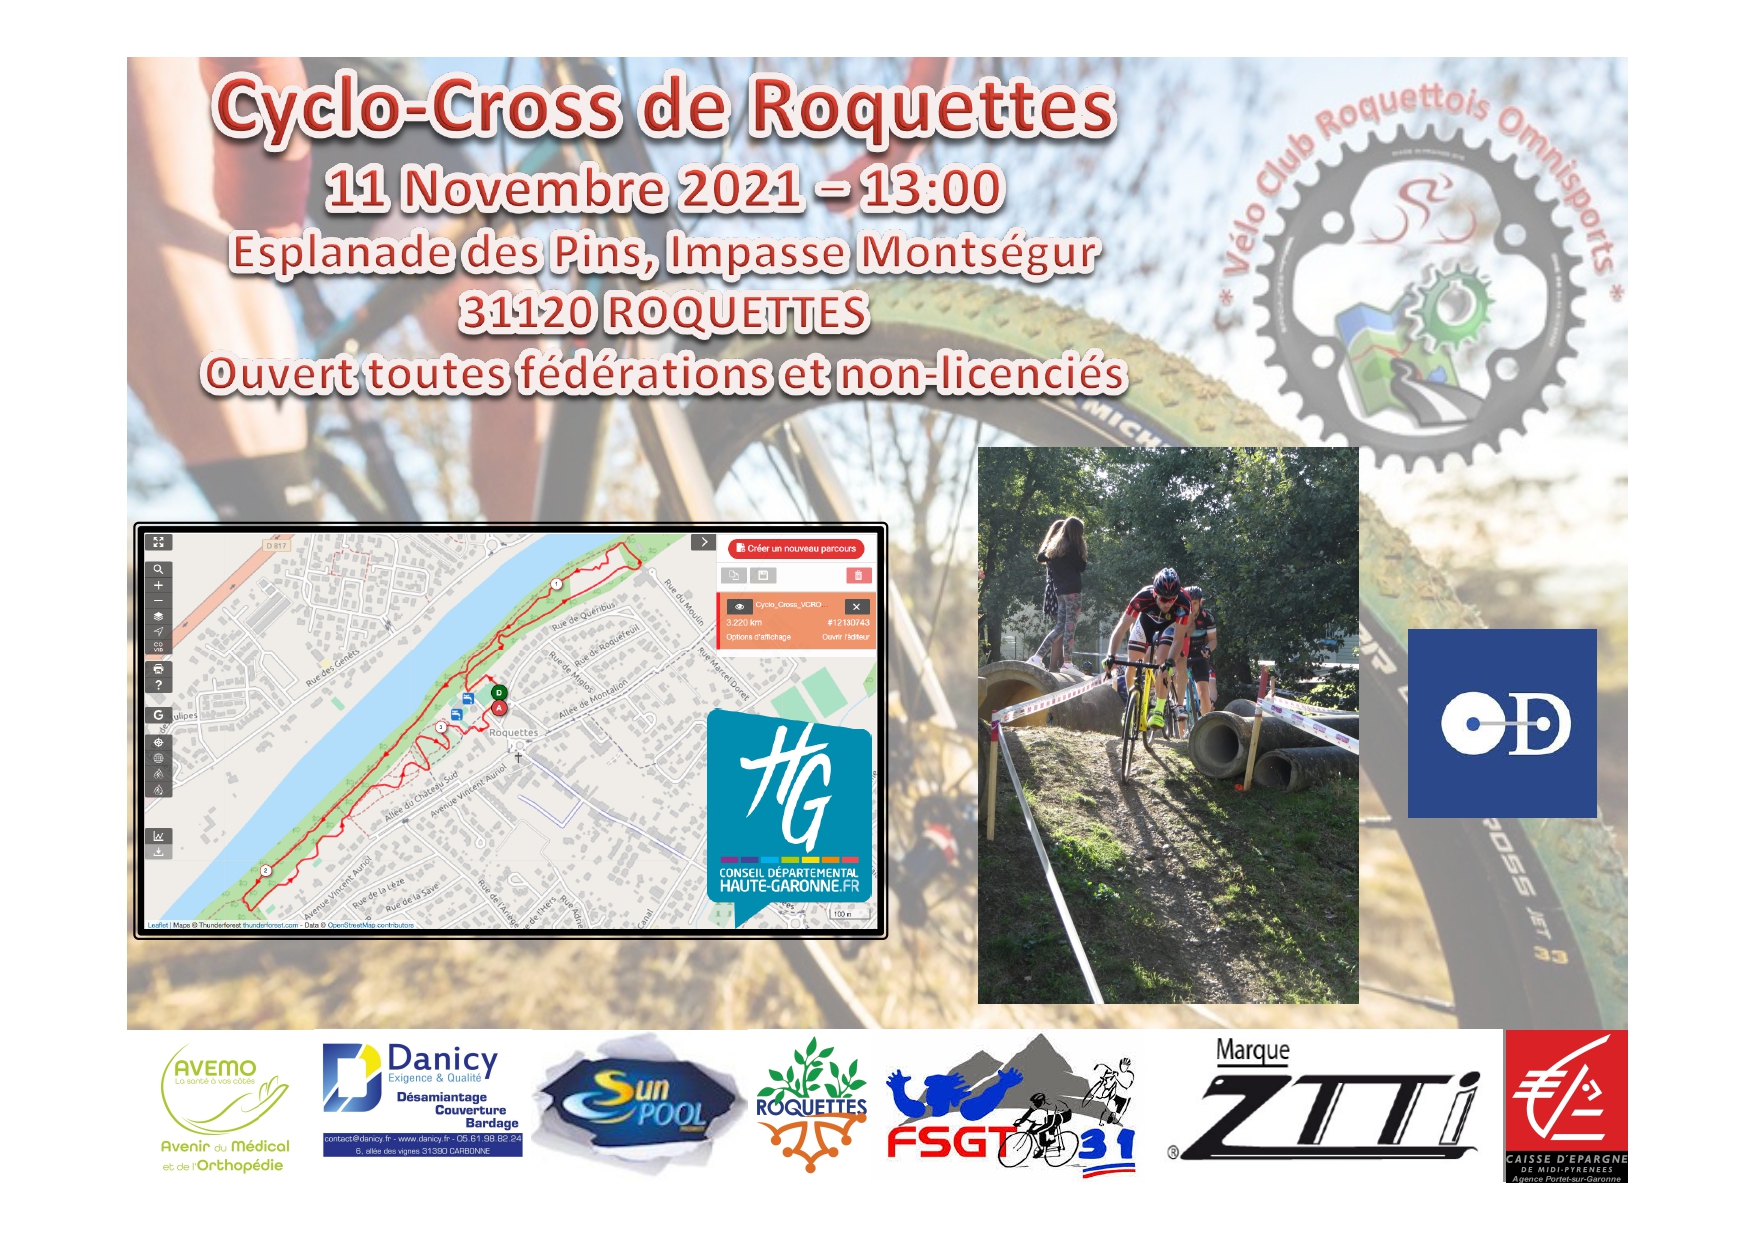 Cyclo Cross Roquettes 2021 r02